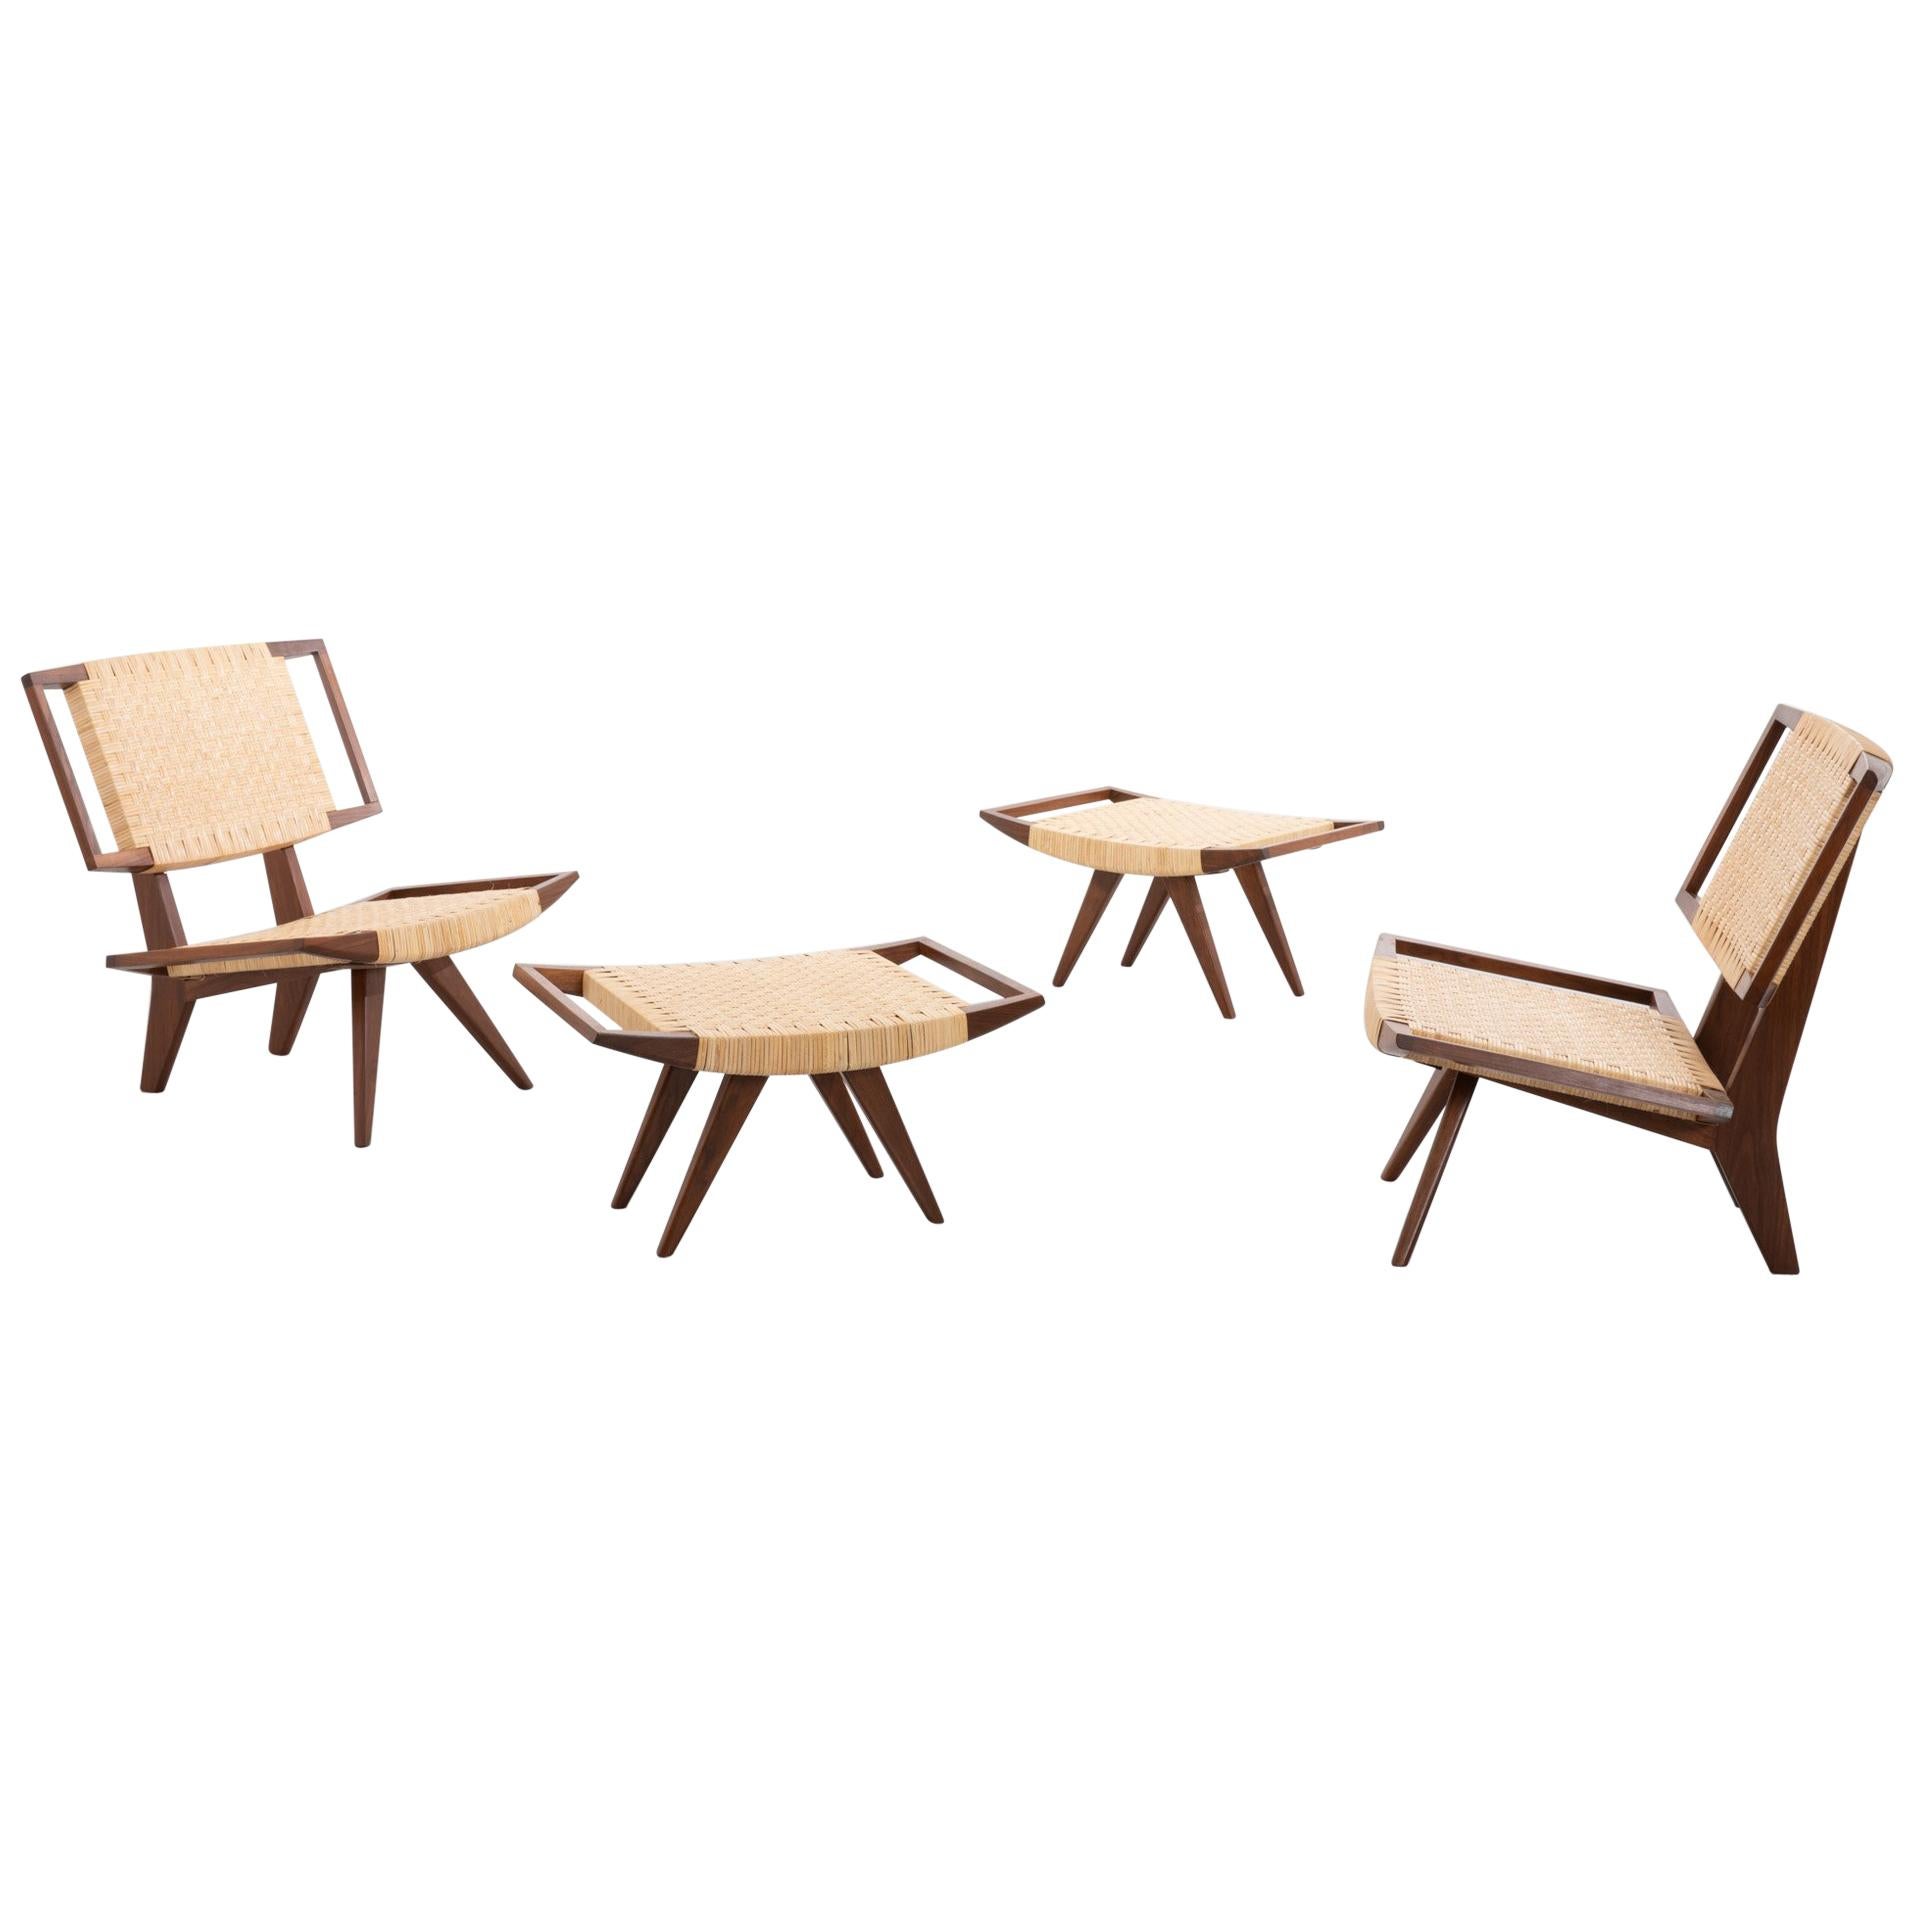 Easy Chairs and Ottomans by Paul László for Glenn of California, 1950s For Sale